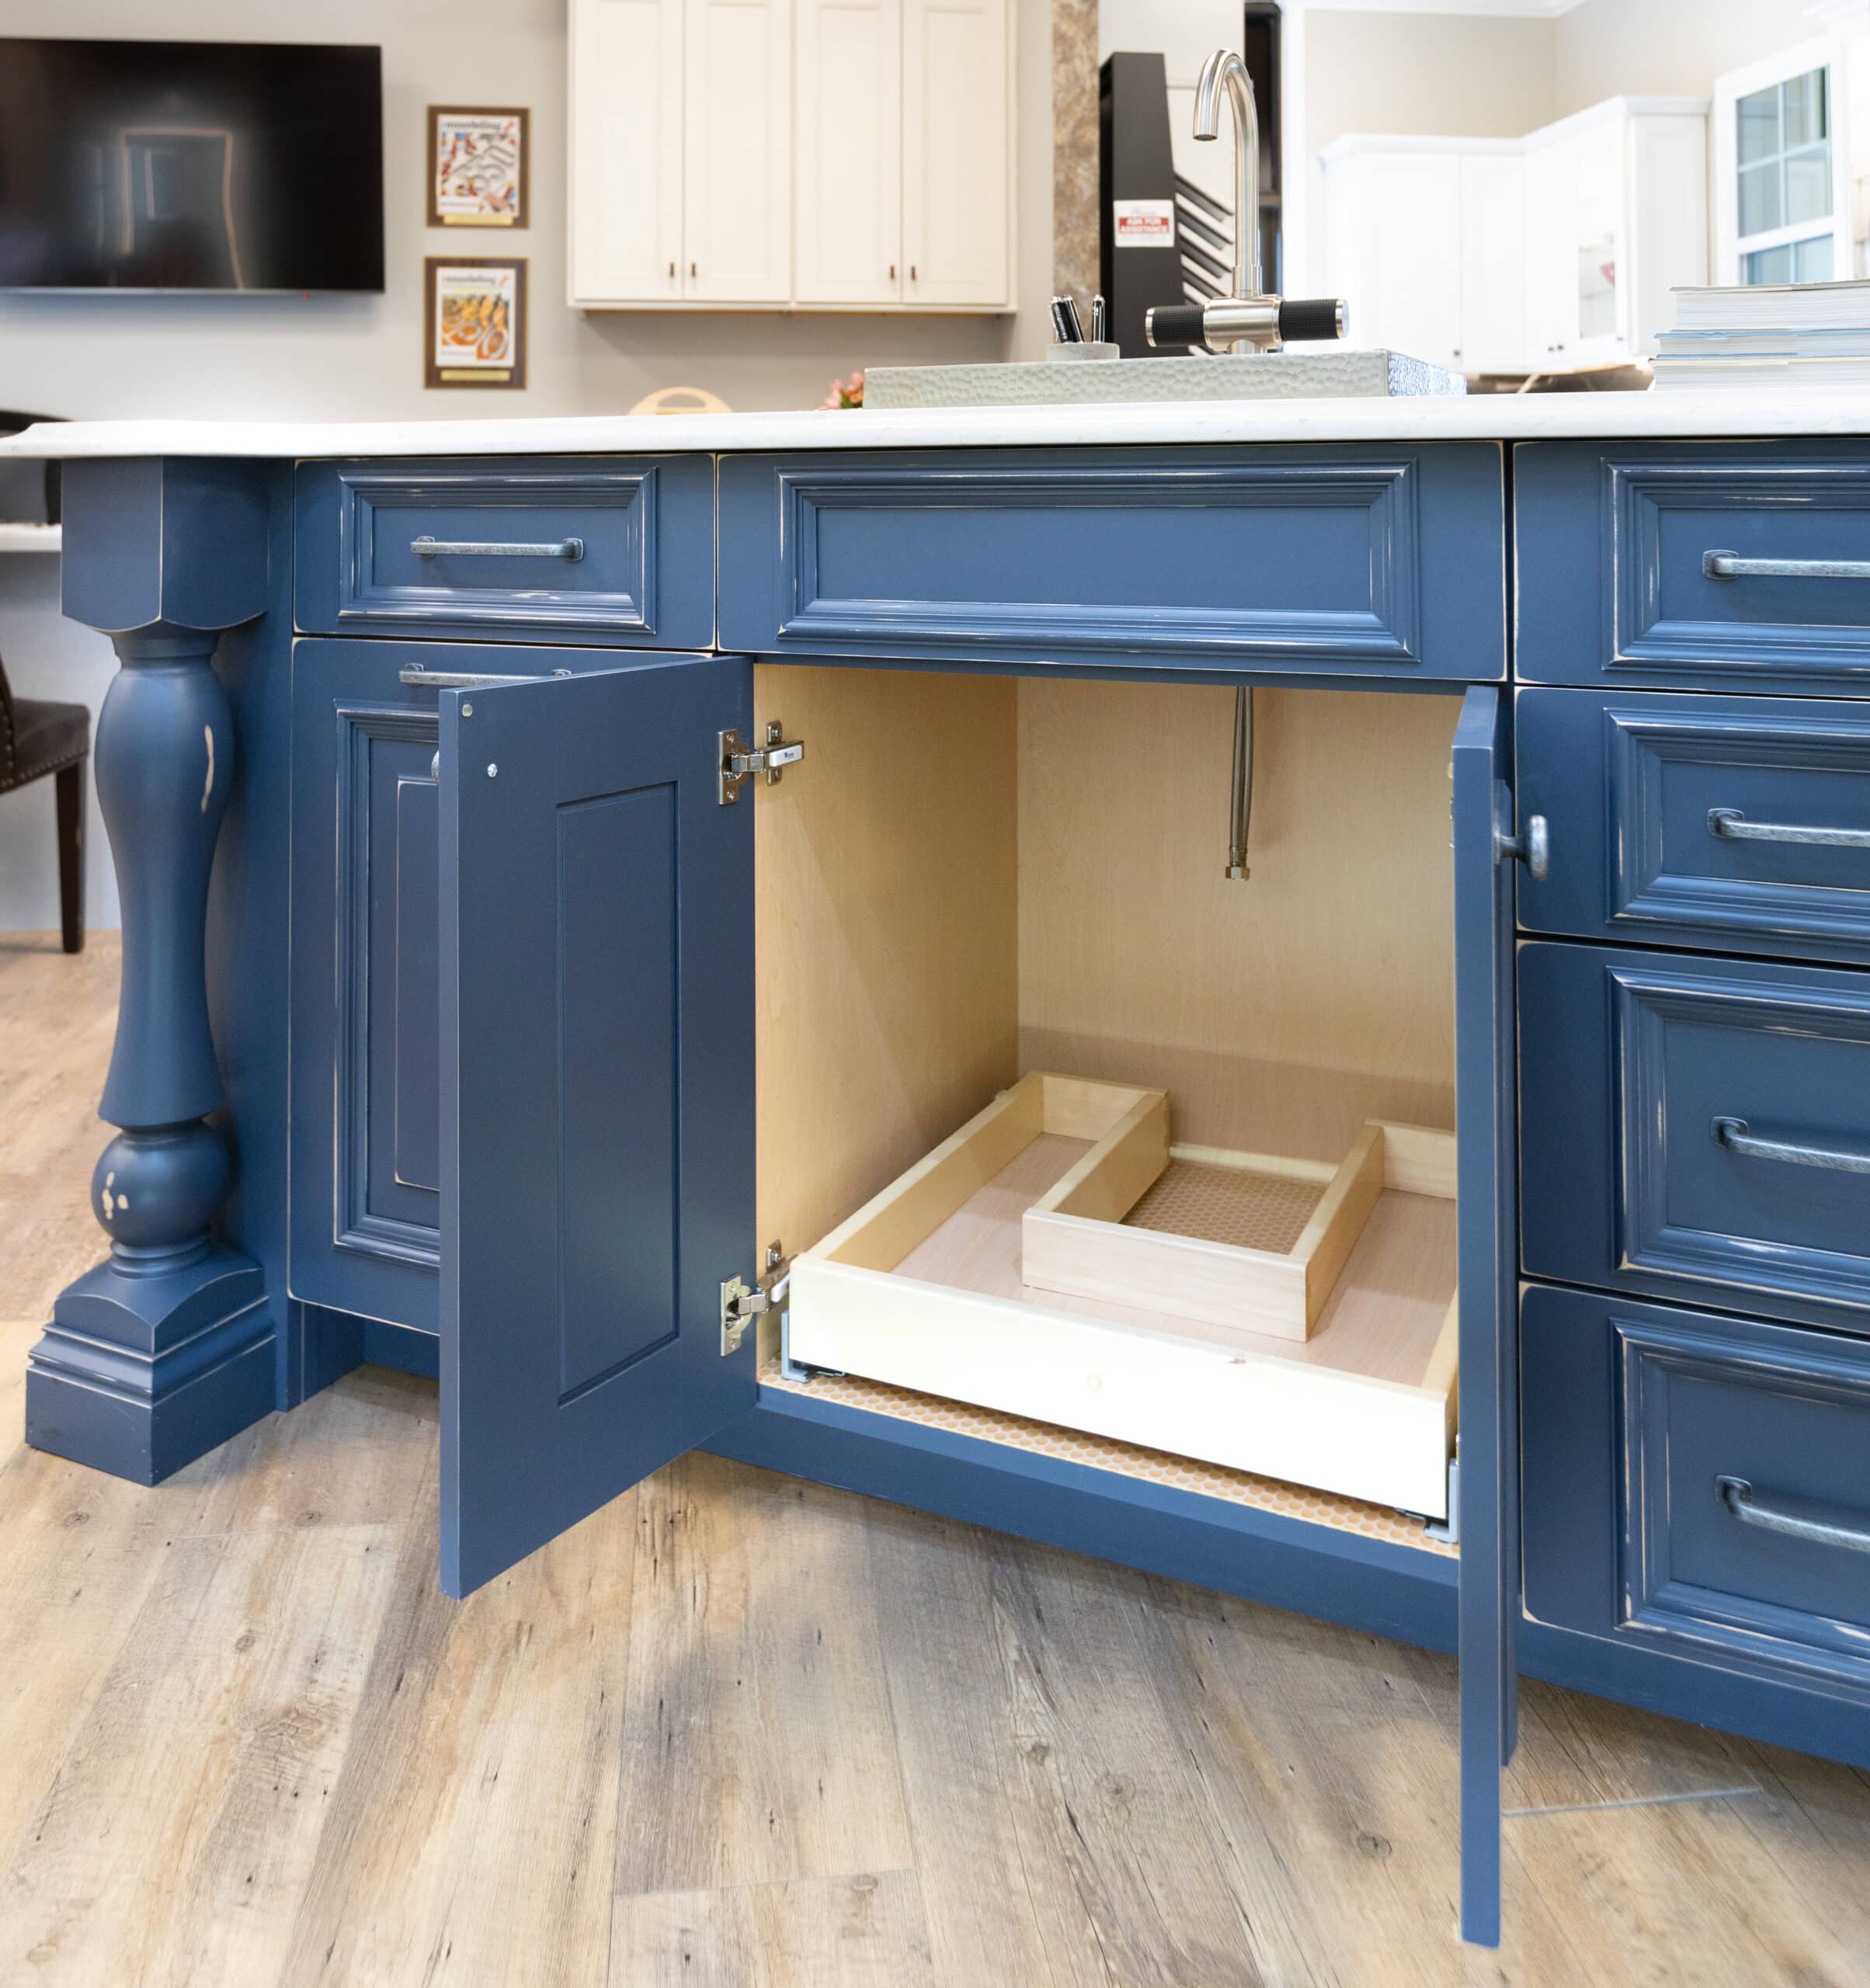 A kitchen island with drawers and a sink